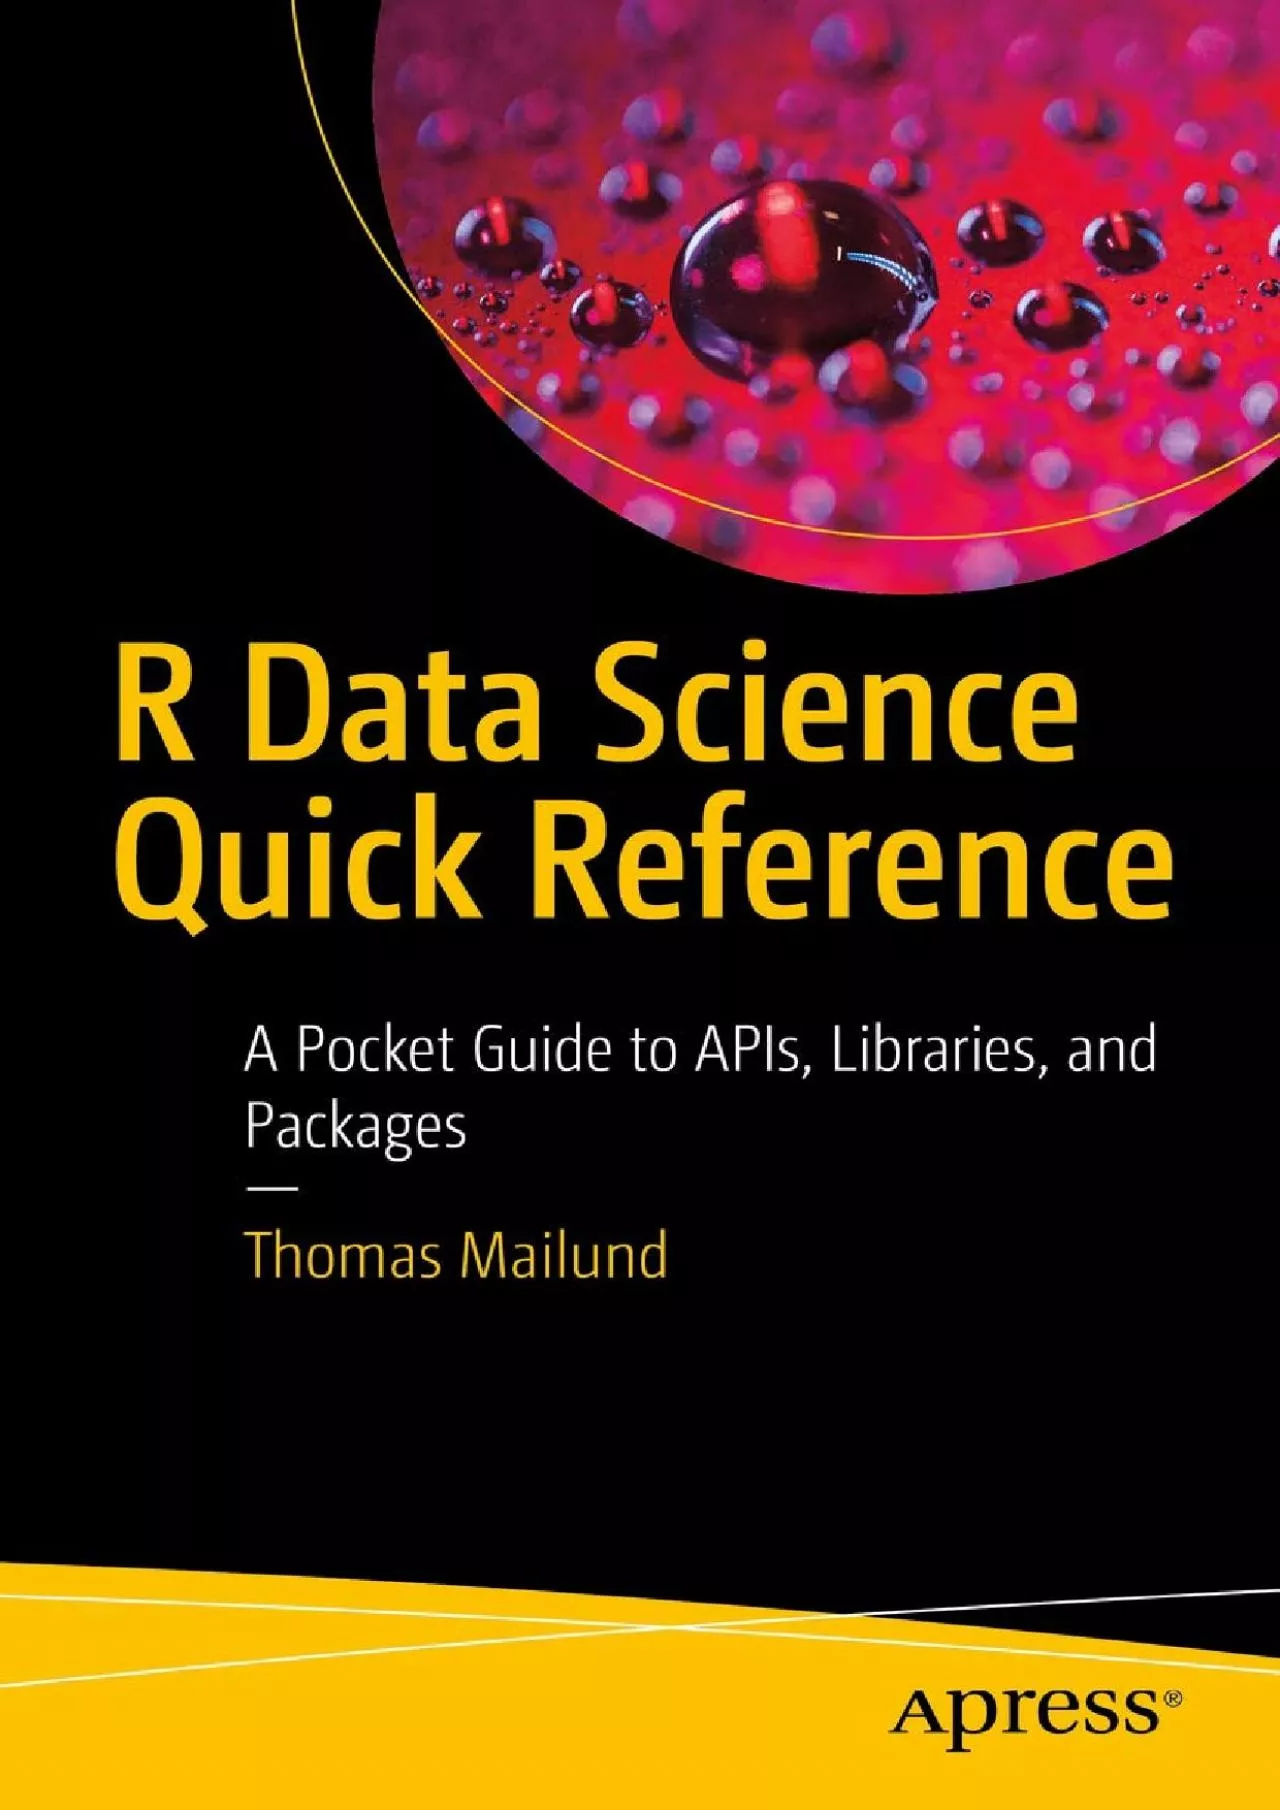 [eBOOK]-R Data Science Quick Reference: A Pocket Guide to APIs, Libraries, and Packages